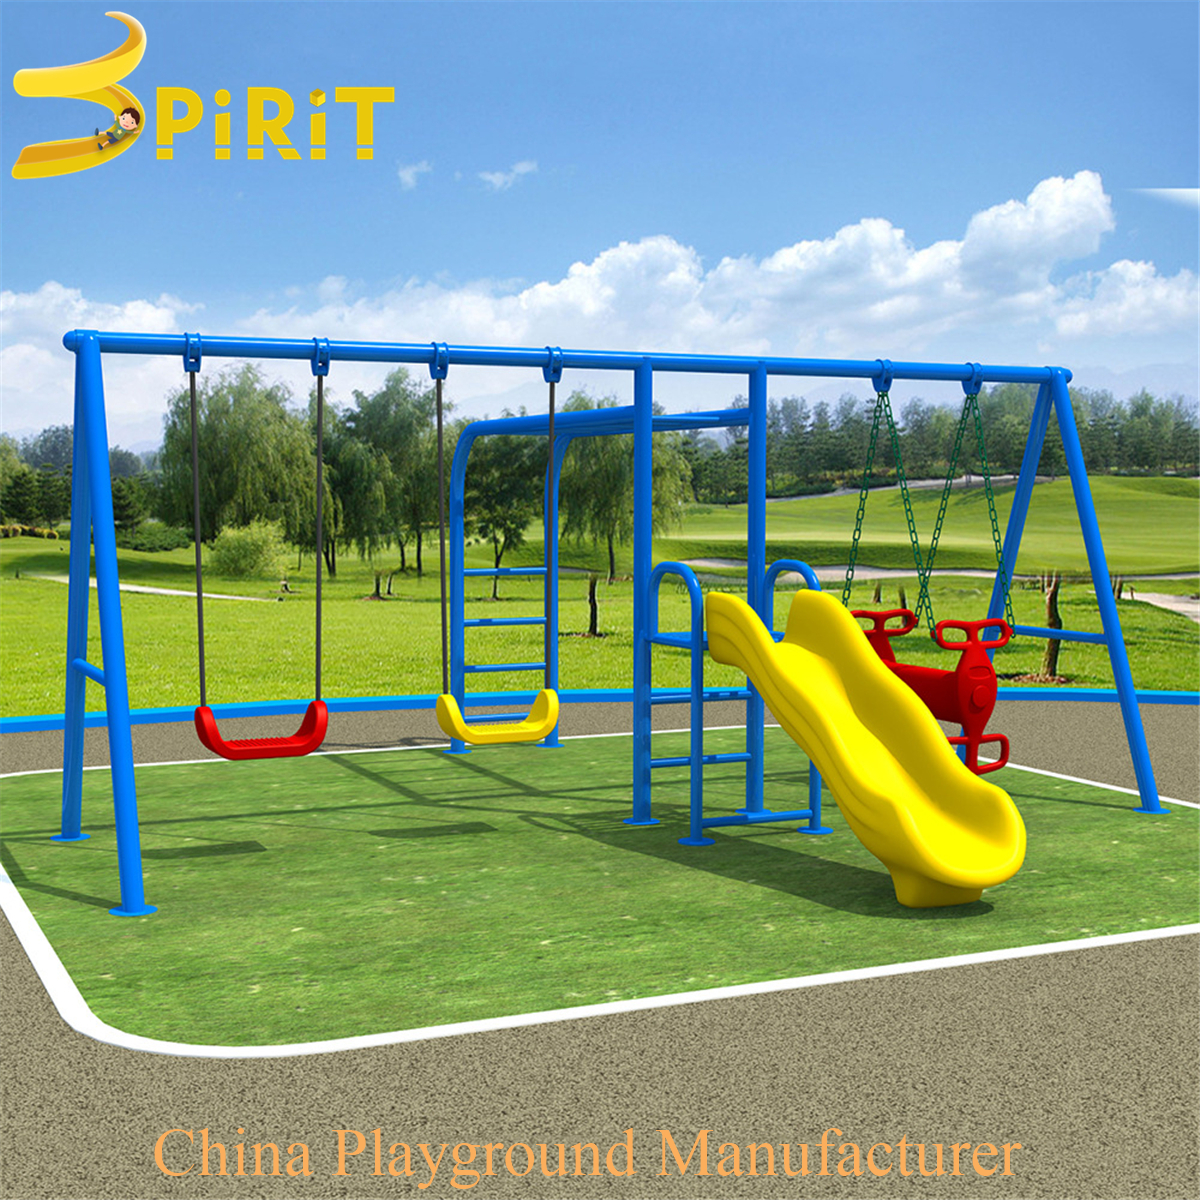 What is the safest play swings for kids in park?-SPIRIT PLAY,Outdoor Playground, Indoor Playground,Trampoline Park,Outdoor Fitness,Inflatable,Soft Playground,Ninja Warrior,Trampoline Park,Playground Structure,Play Structure,Outdoor Fitness,Water Park,Play System,Freestanding,Interactive,independente ,Inklusibo, Park, Pagsaka sa Bungbong, Dula sa Bata